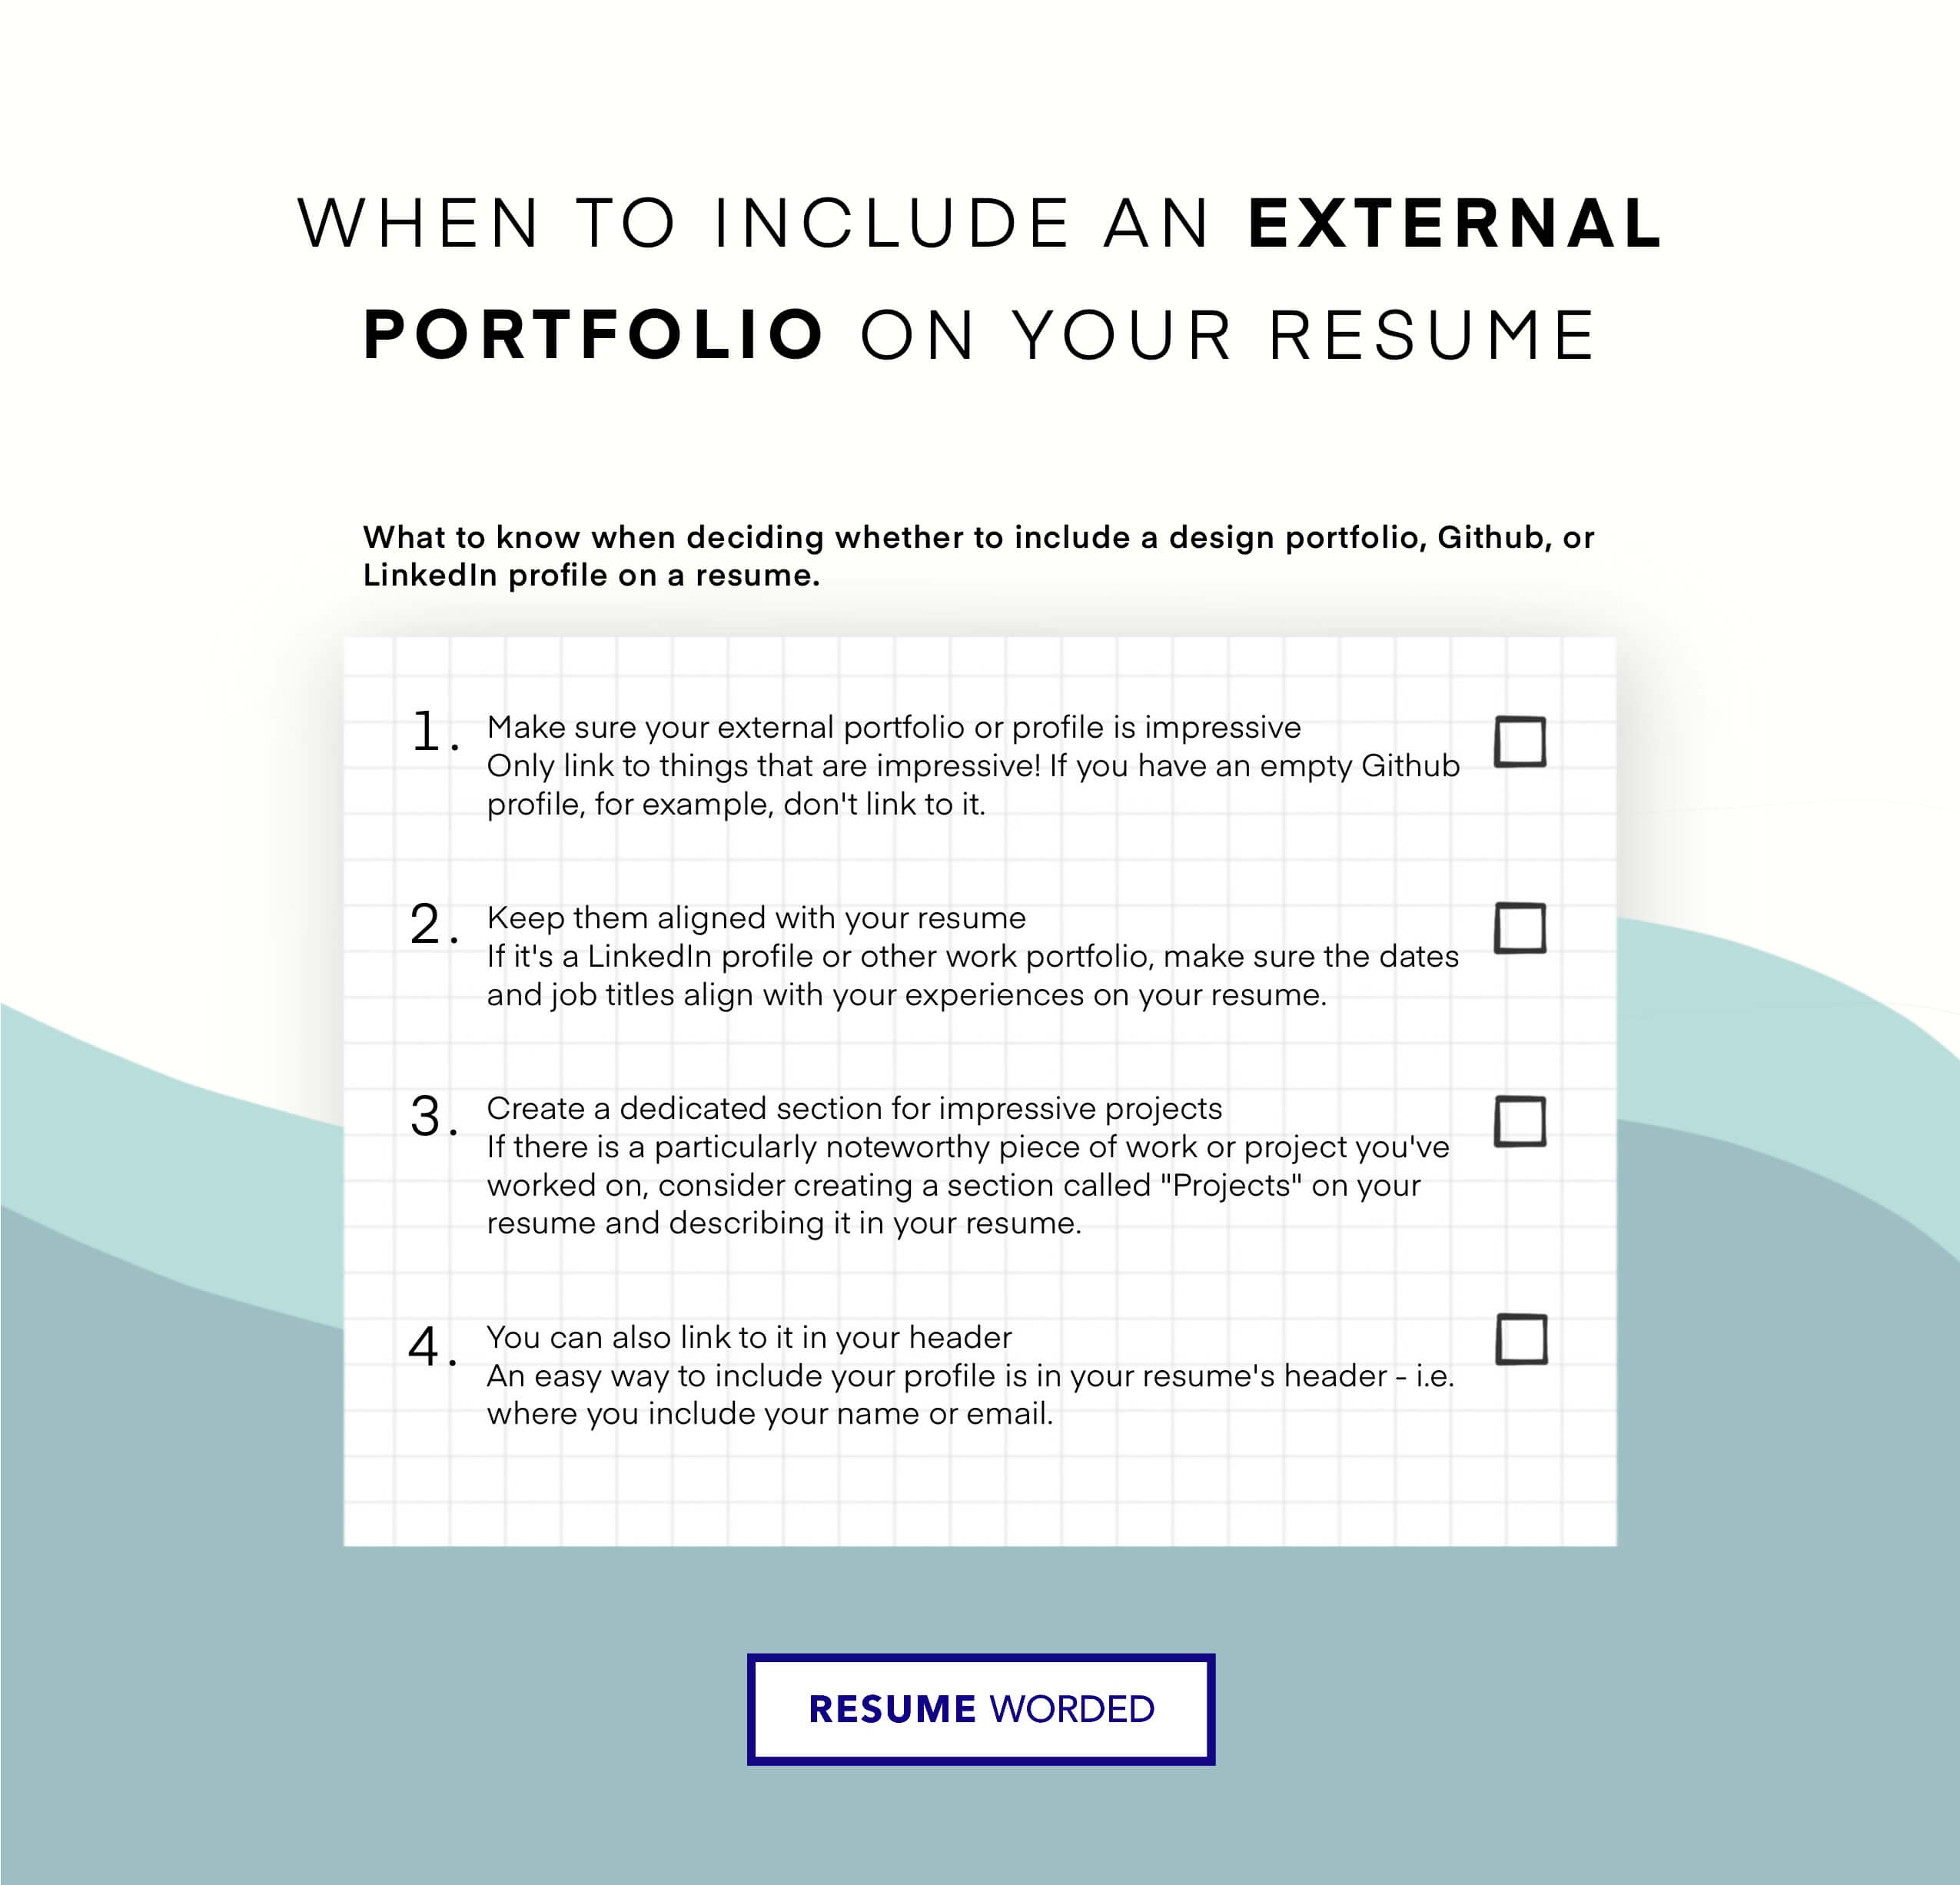 Create mock content for your portfolio. - Entry-Level Technical Writer Resume